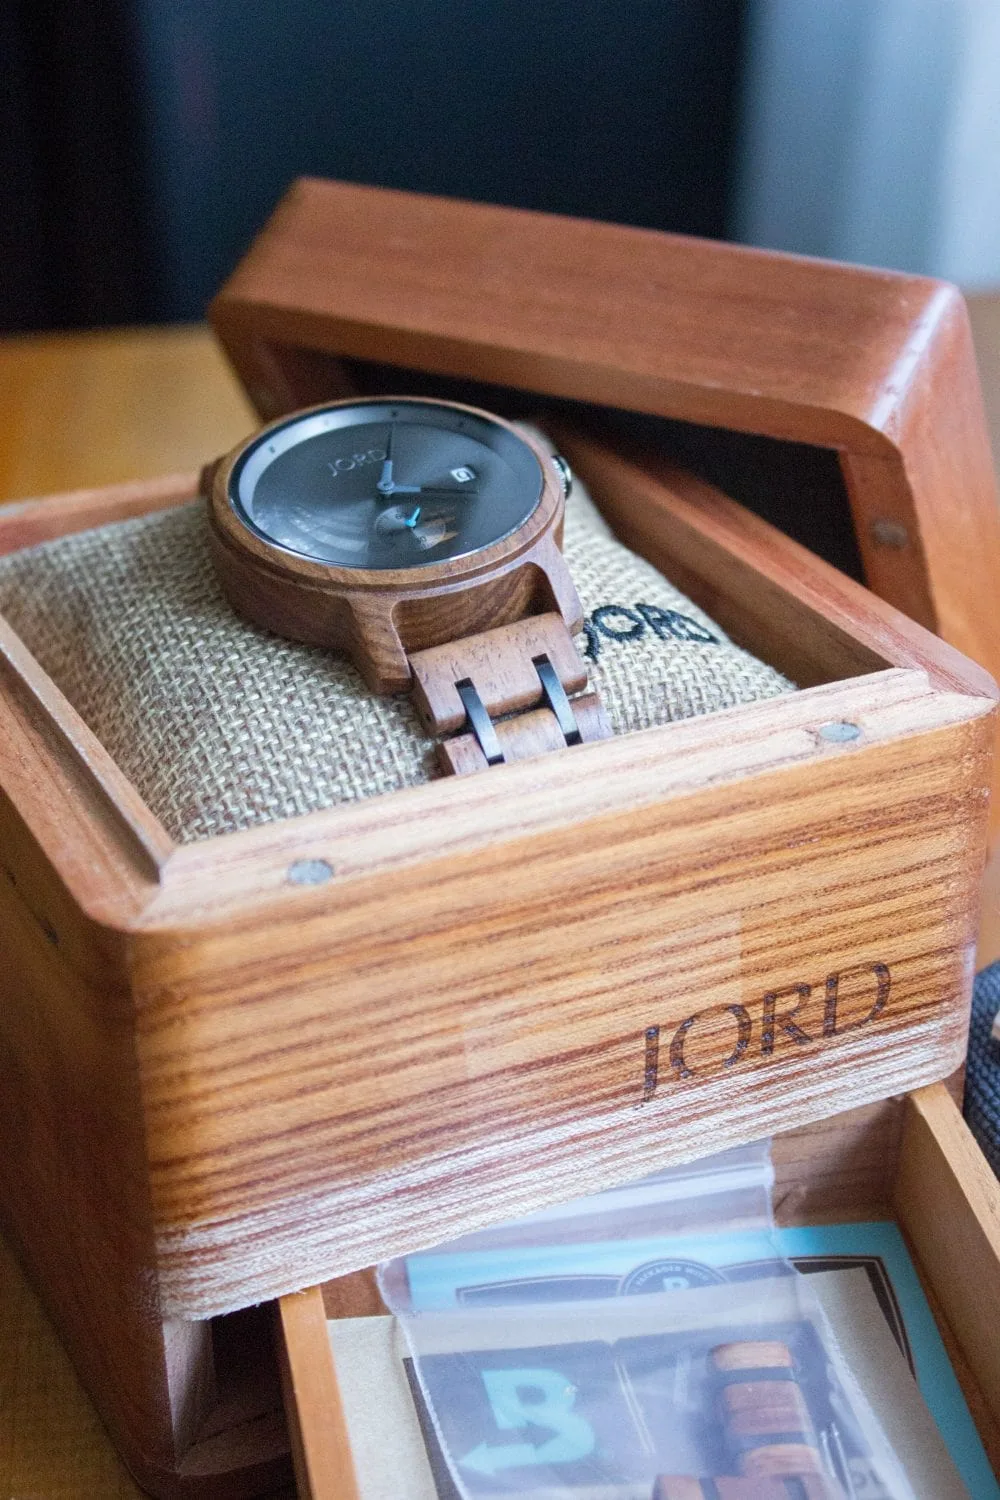 Jord watch in its box. 